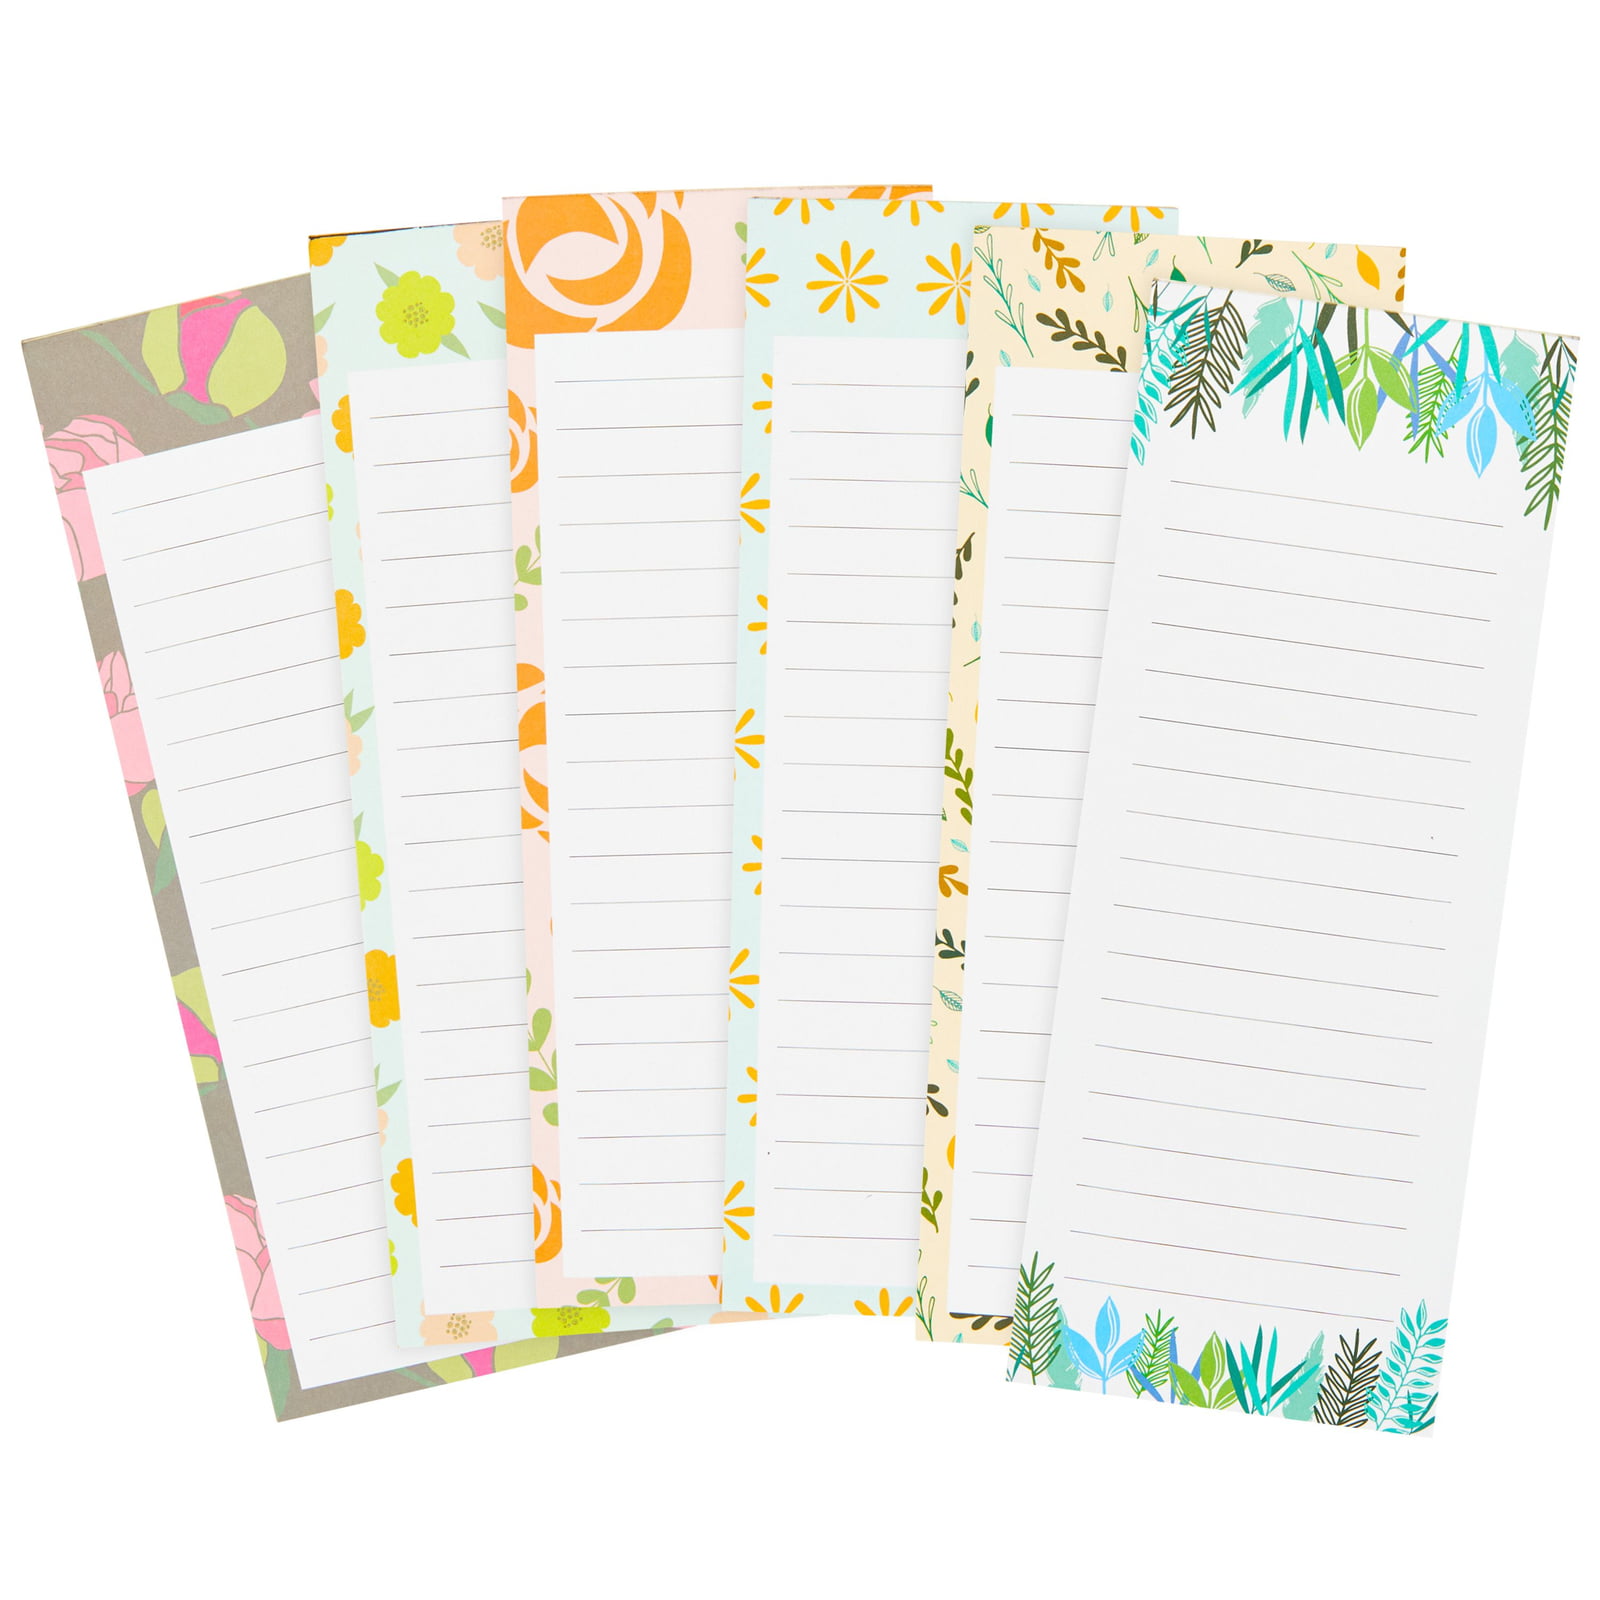 Shopping List Grocery List Notepad 50 Page Rory and Paige Refrigerator Clipboard Set Notepads for Lists A5 Notepad Holder Including Pen Holder Magnetic Grocery List to Do List Pad 